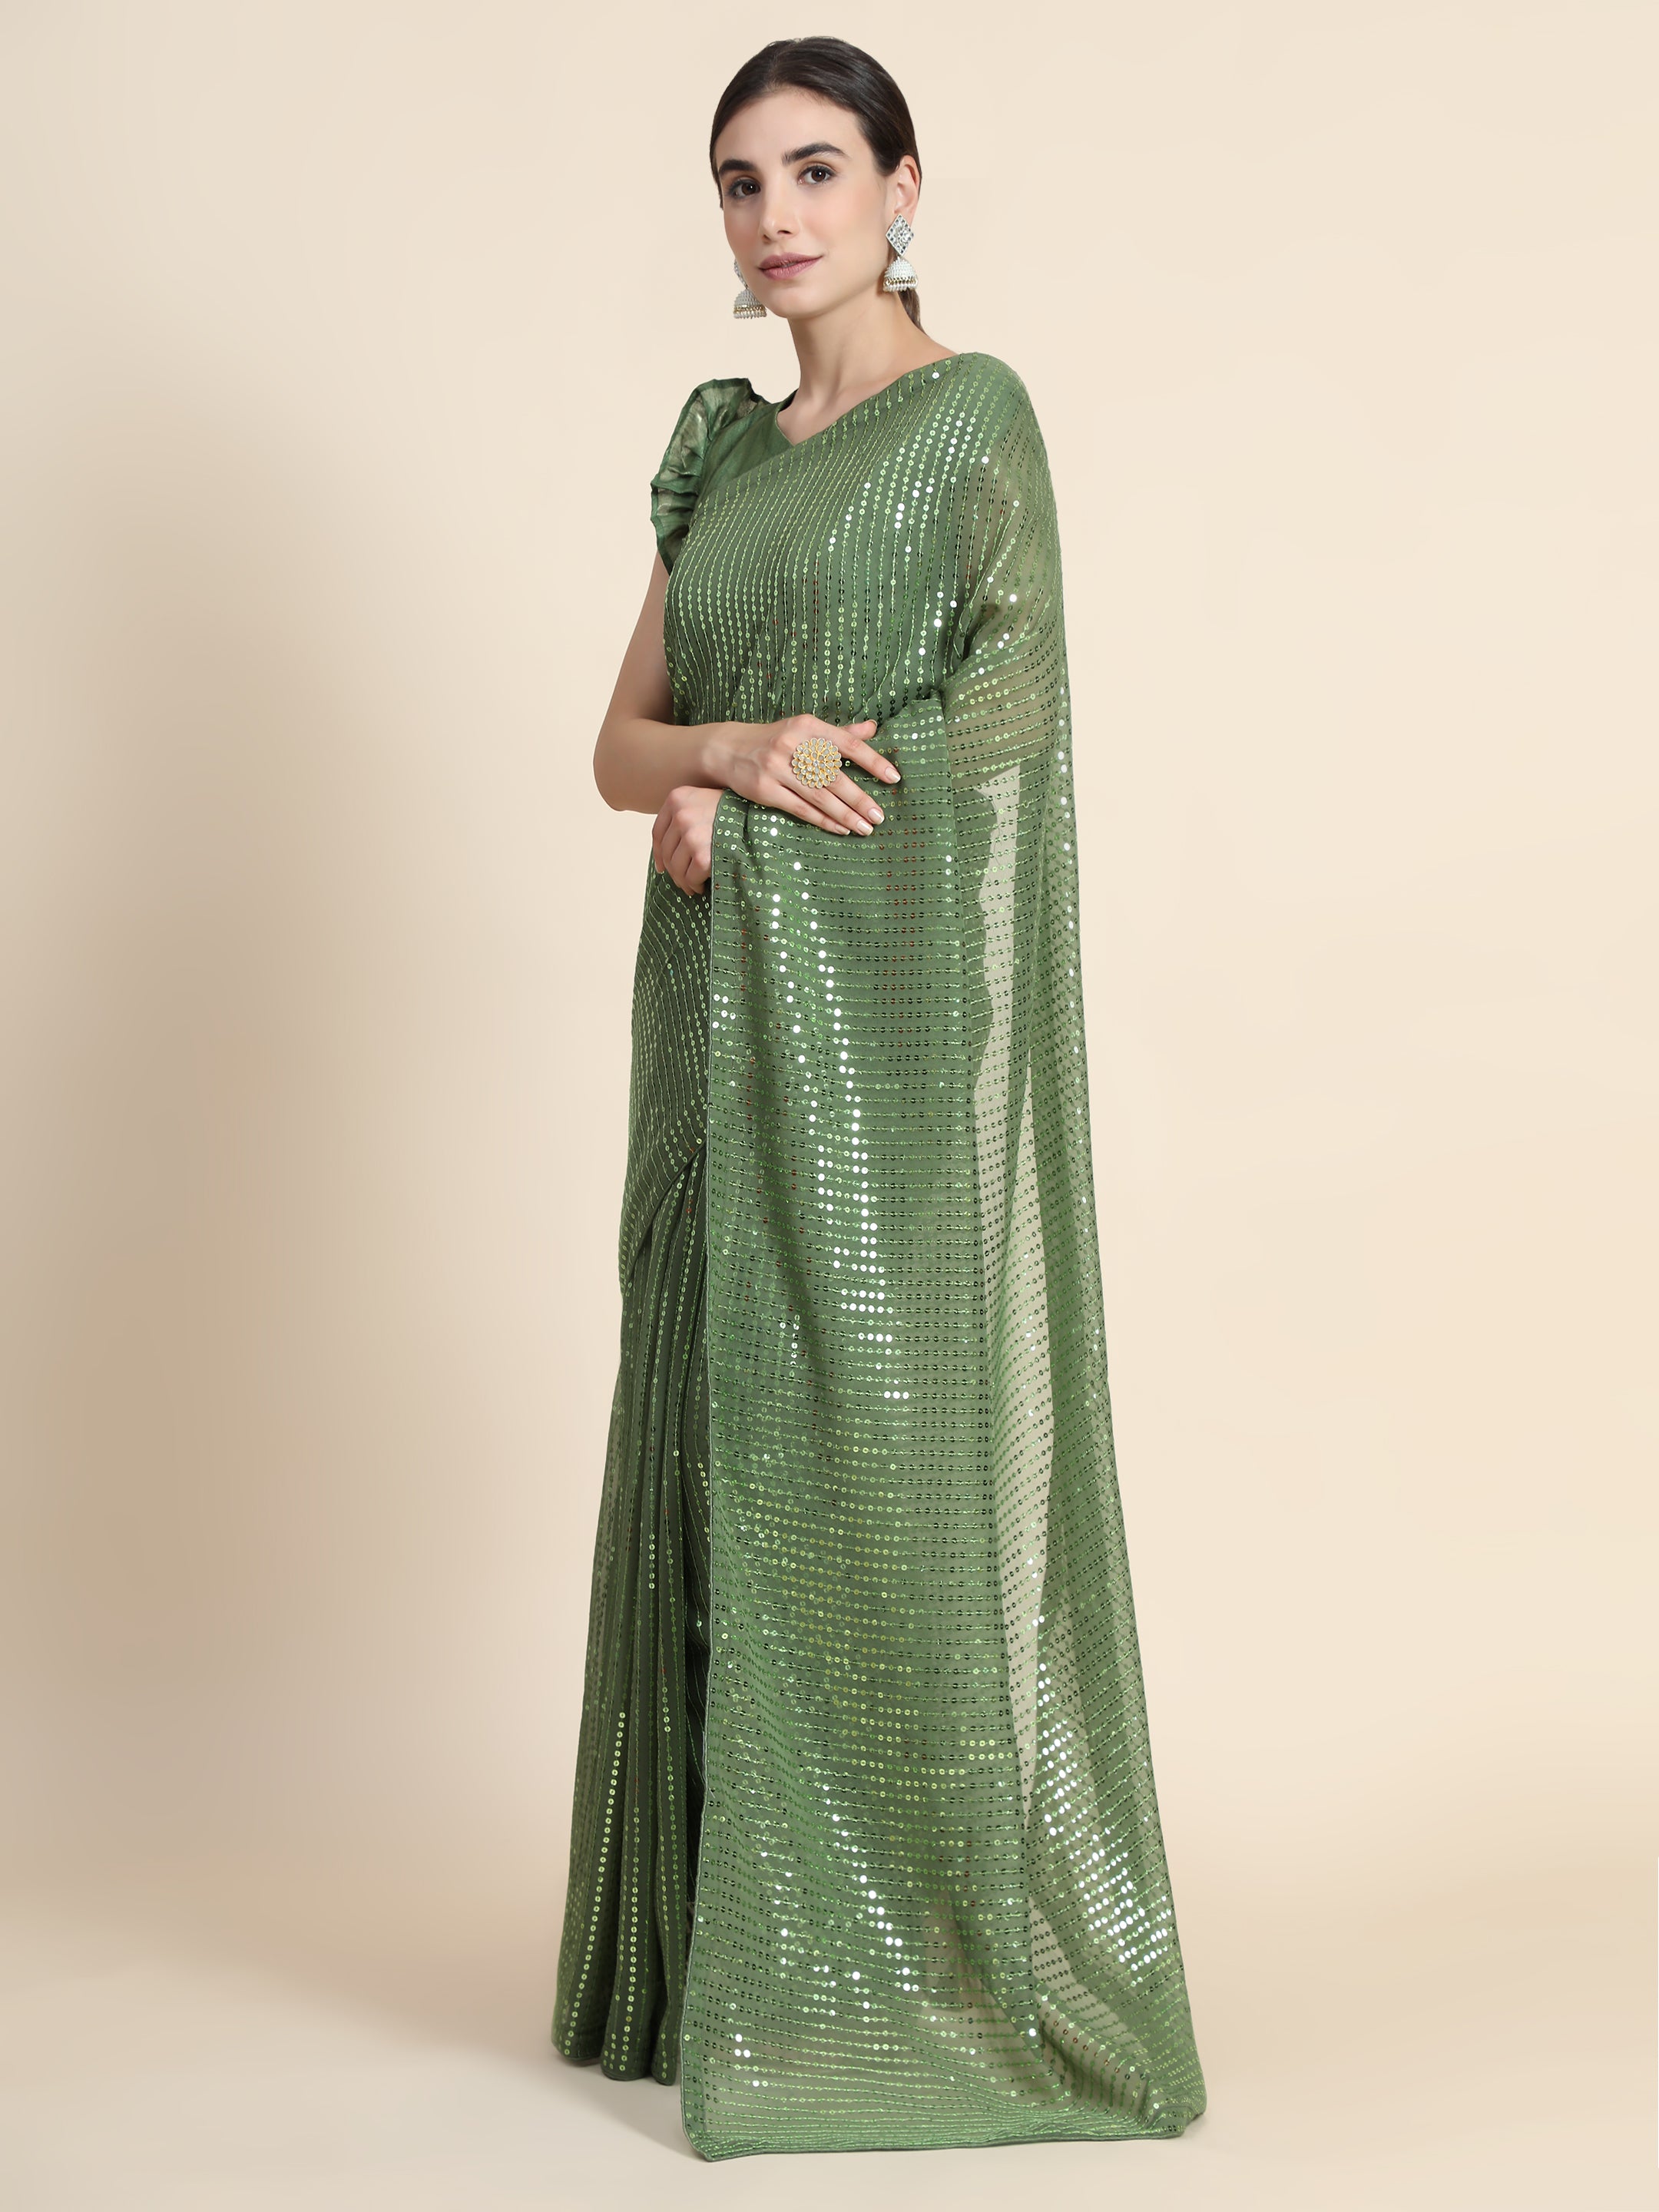 Women's Sequin Striped Paty Wear Contemporary Georgette Saree With Blouse Piece (Mendhai Green) - NIMIDHYA